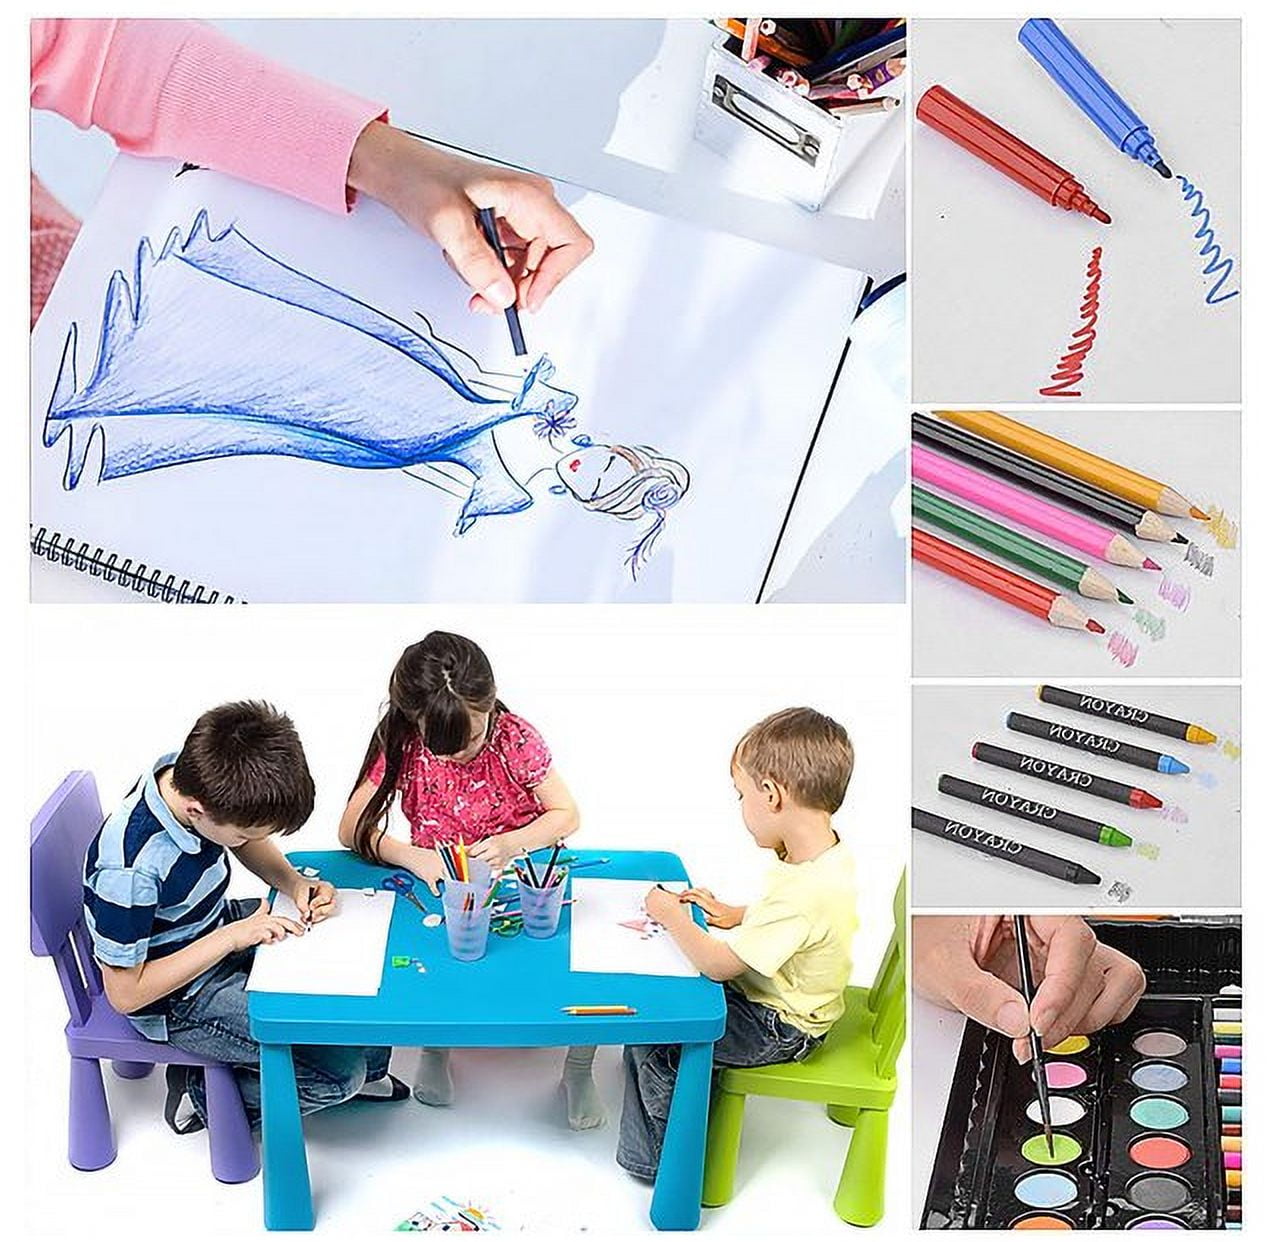 Kids Art Set 150 Piece Art Supply Set, Traveling Or Indoor Art Set To  Inspire Kids Creativity, Draw, Paint, Color and Craft With Carry Case